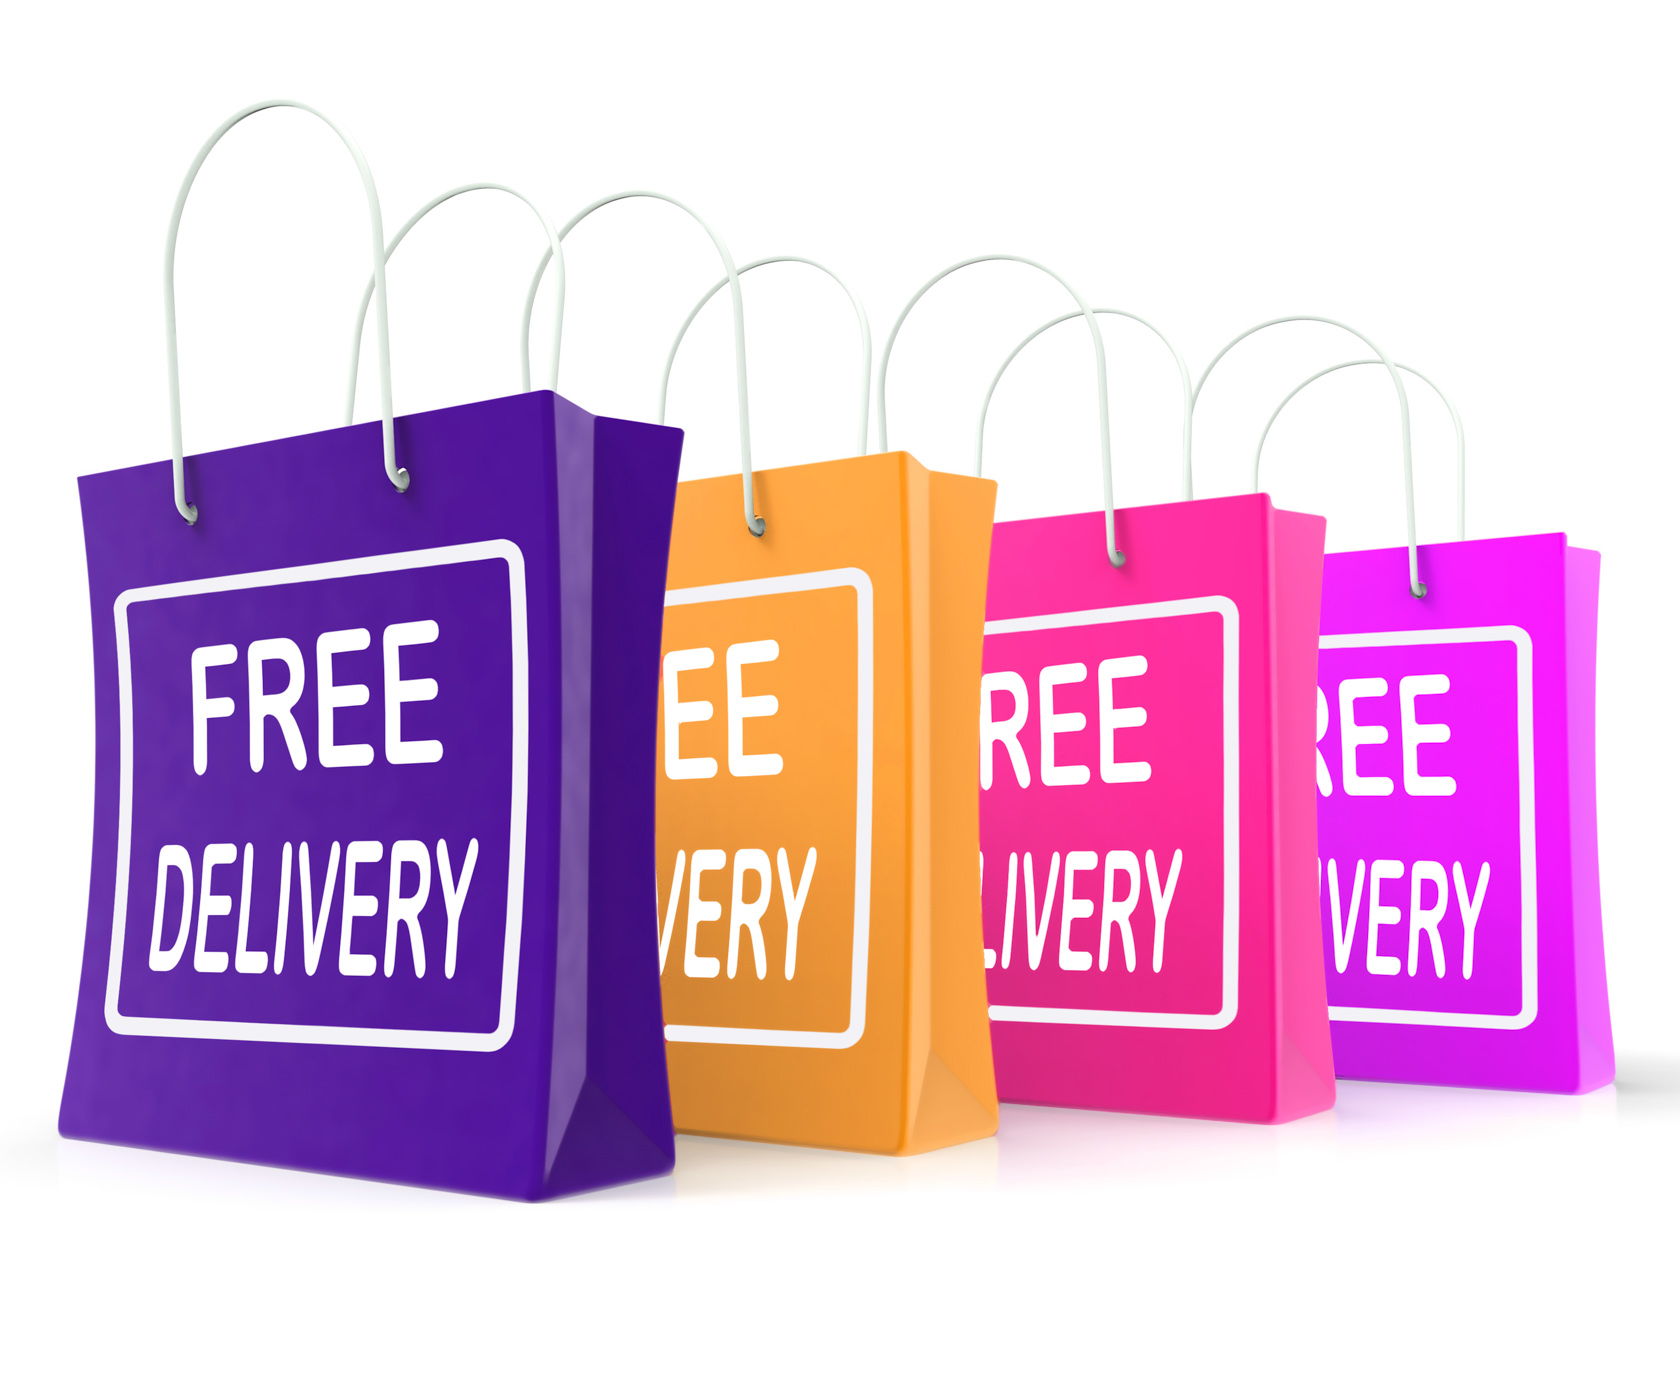 Free delivery shopping bags showing no charge or gratis to deliver photo